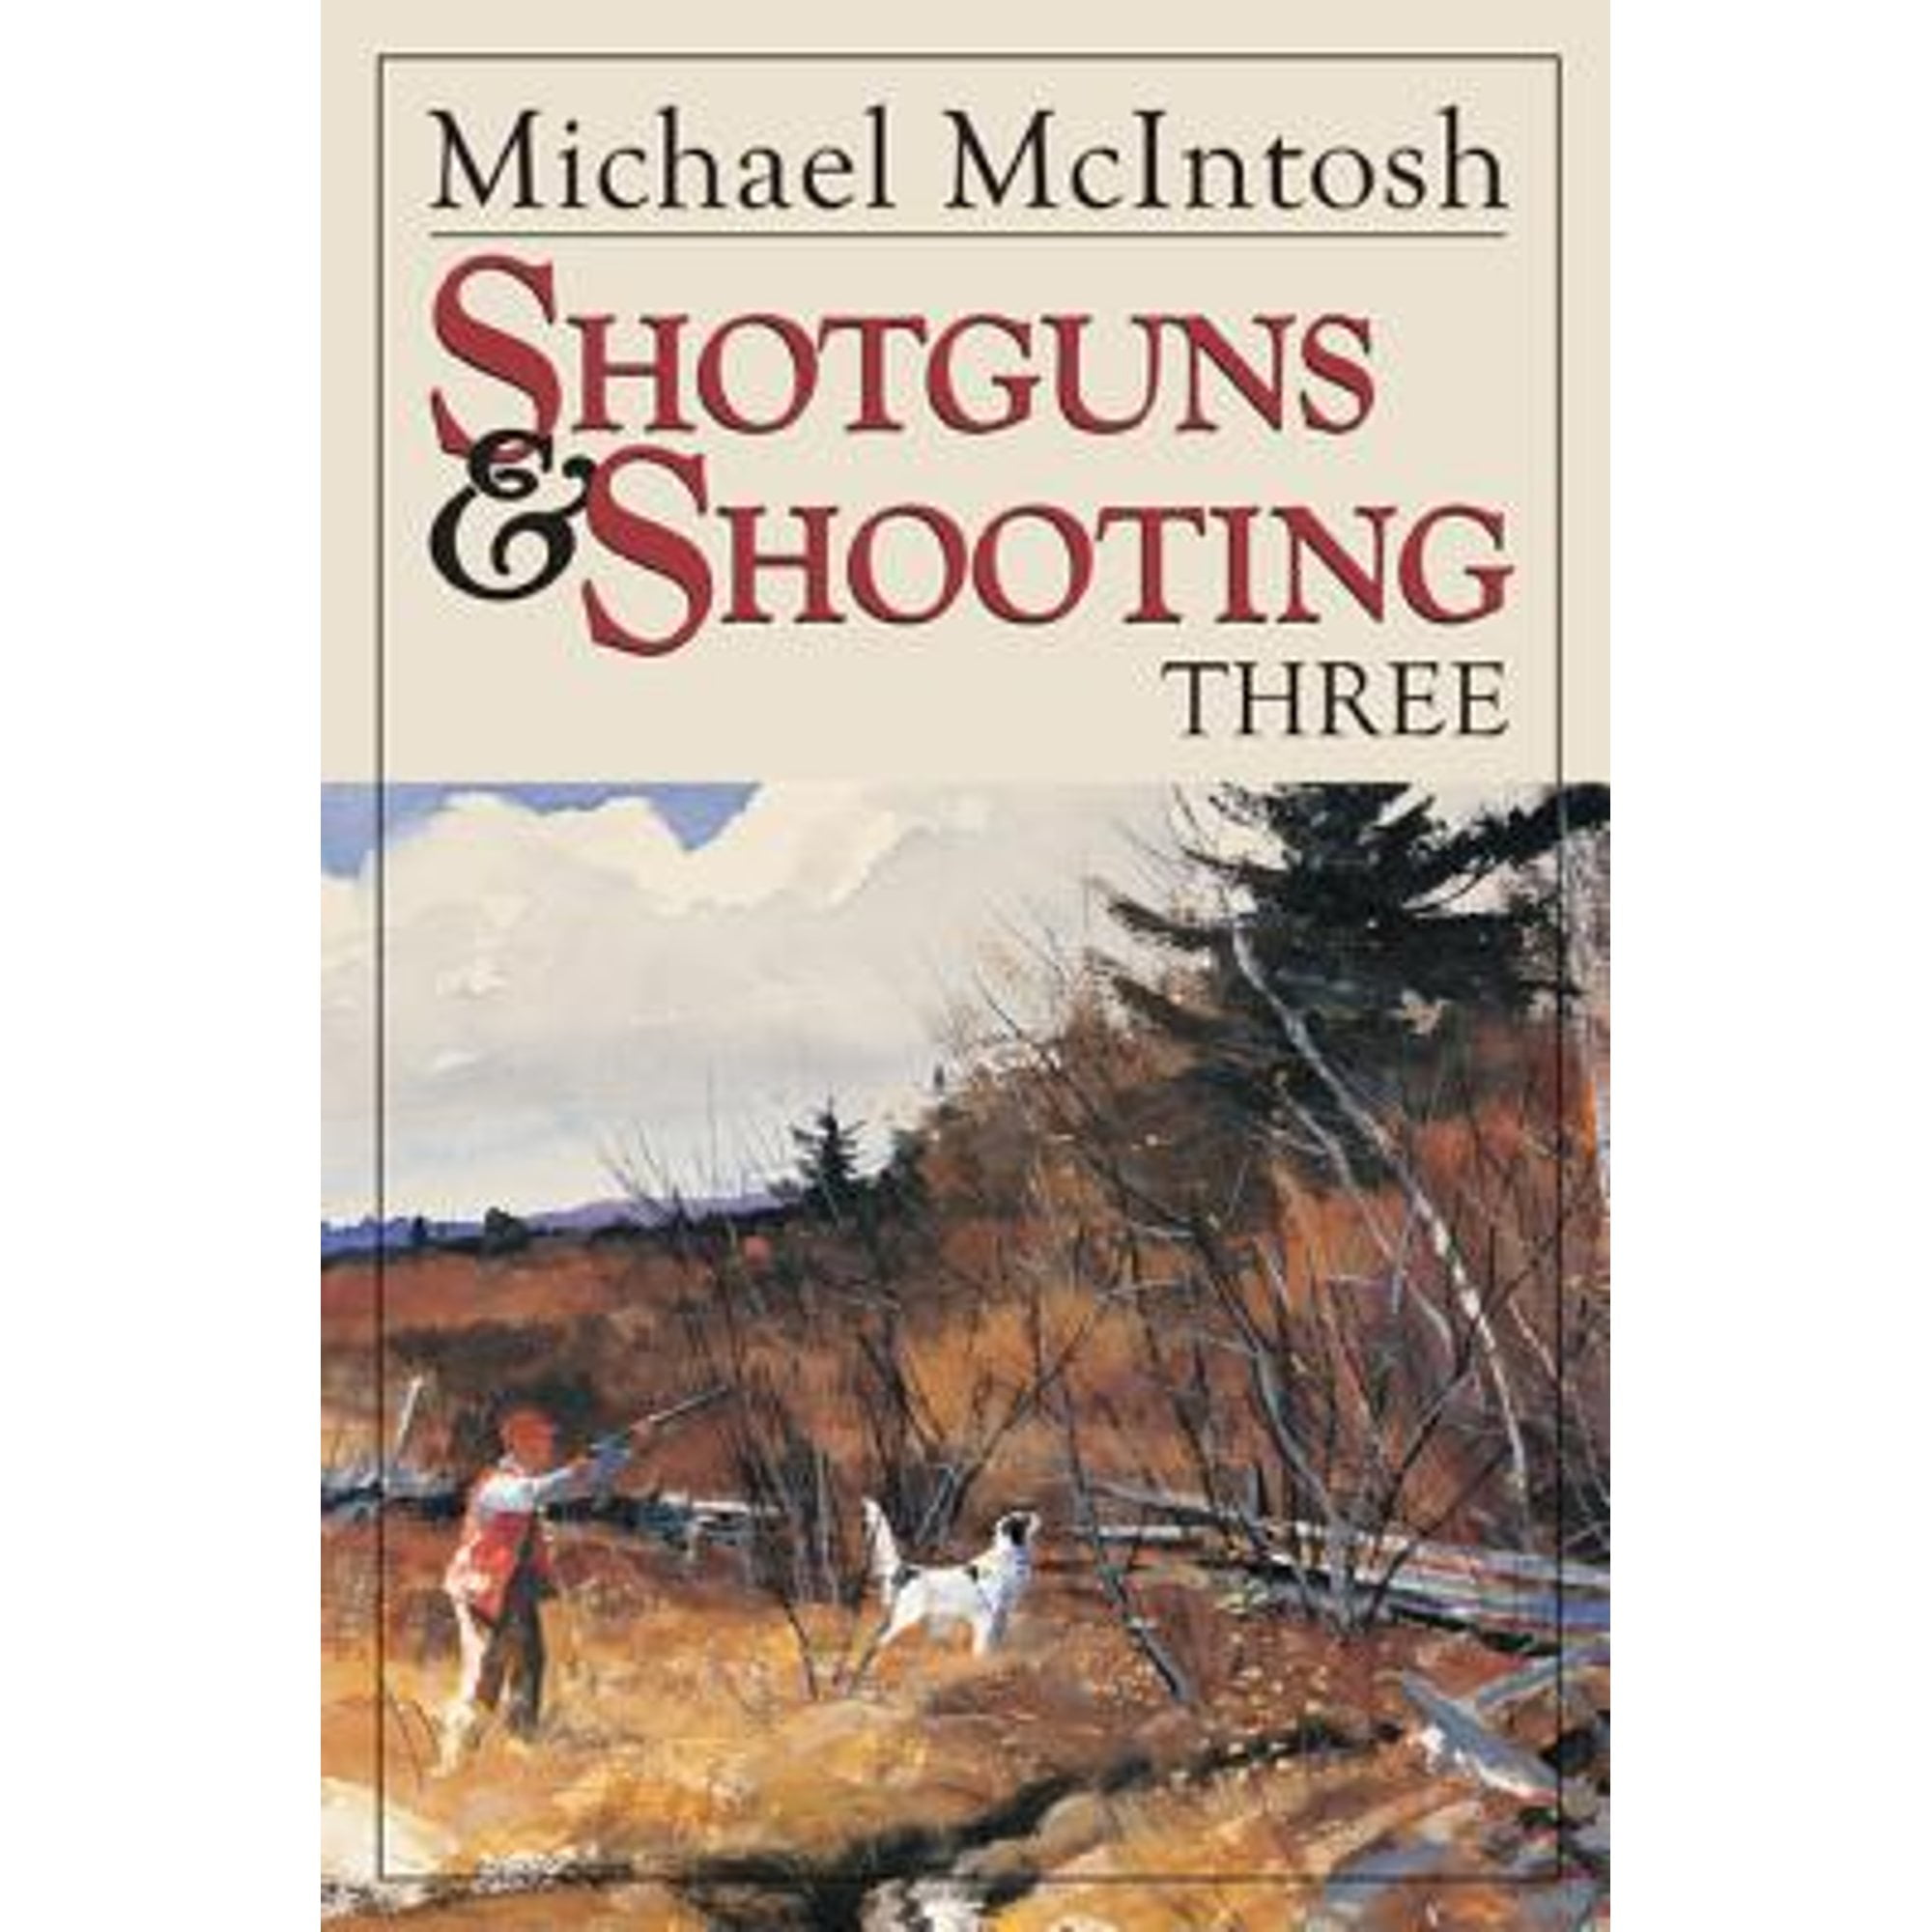 Pre-Owned Shotguns and Shooting Three (Hardcover) by Michael McIntosh